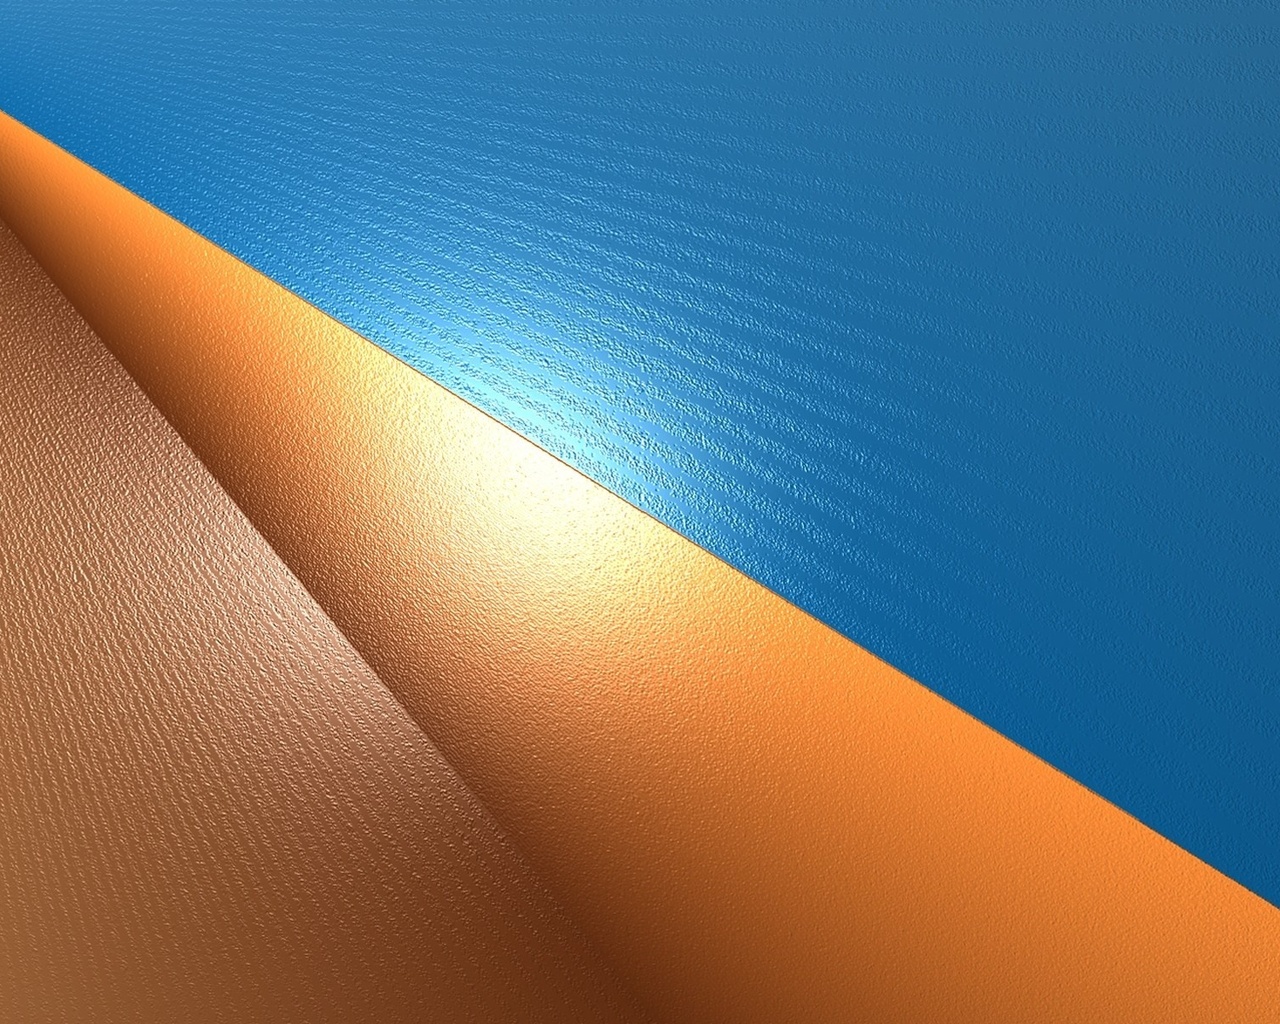 Blue orange abstract textures backgrounds